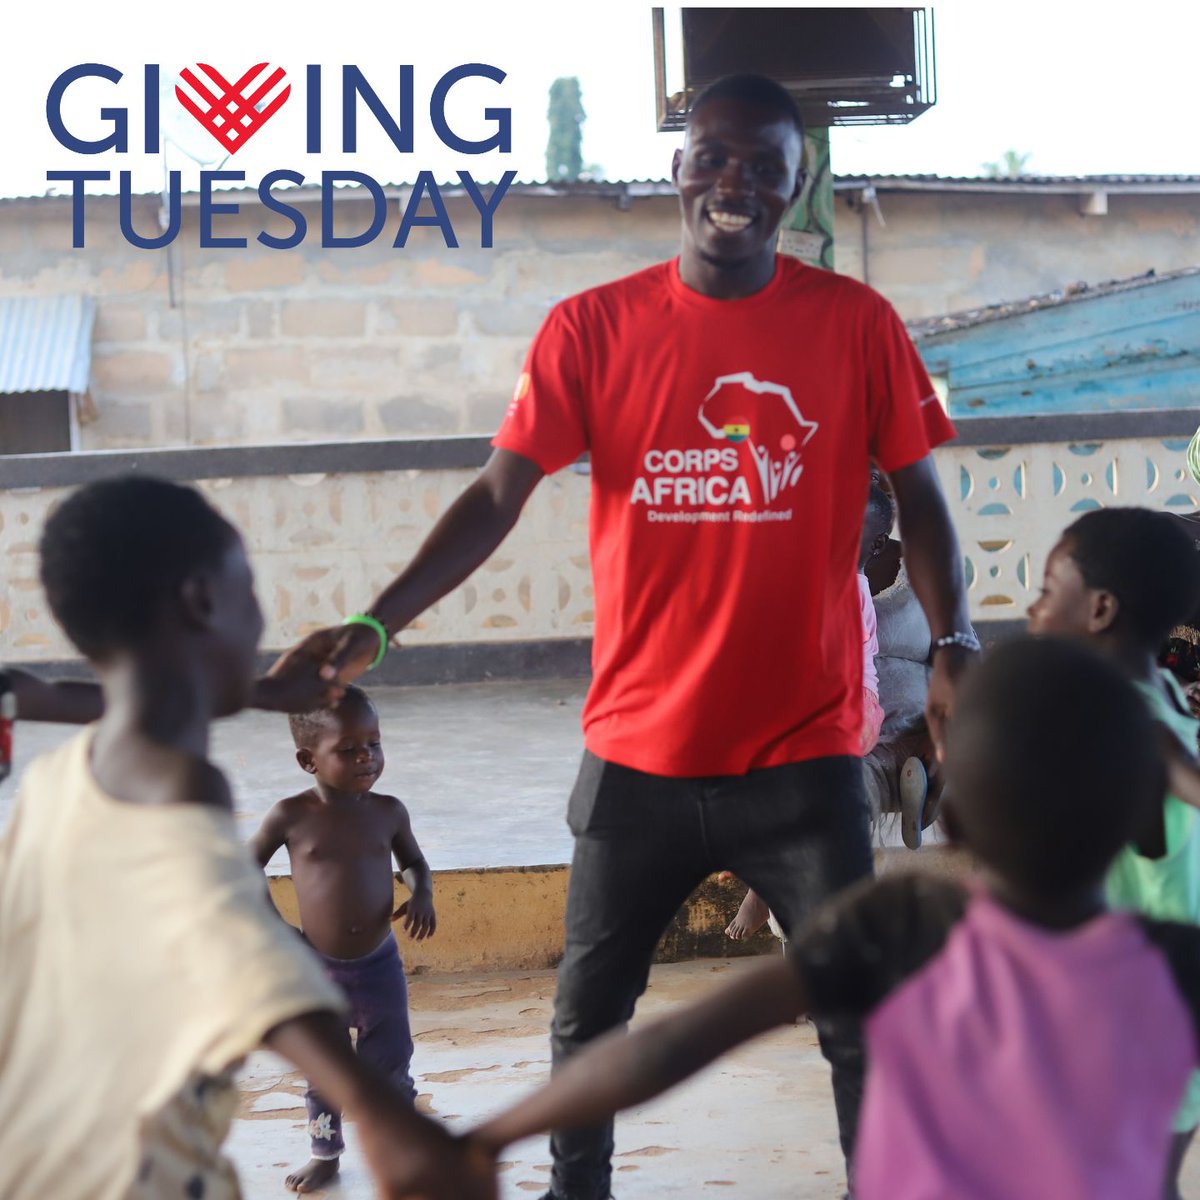 This year's #GivingTuesday is all about investing in African youth through the support of a @CorpsAfrica Volunteer. Make a difference today! corpsafrica.org/donate/giving-…

#africanvolunteers #Africanyouth #charity #fundraiser #goodcause #givingseason #foracause #makeadifference